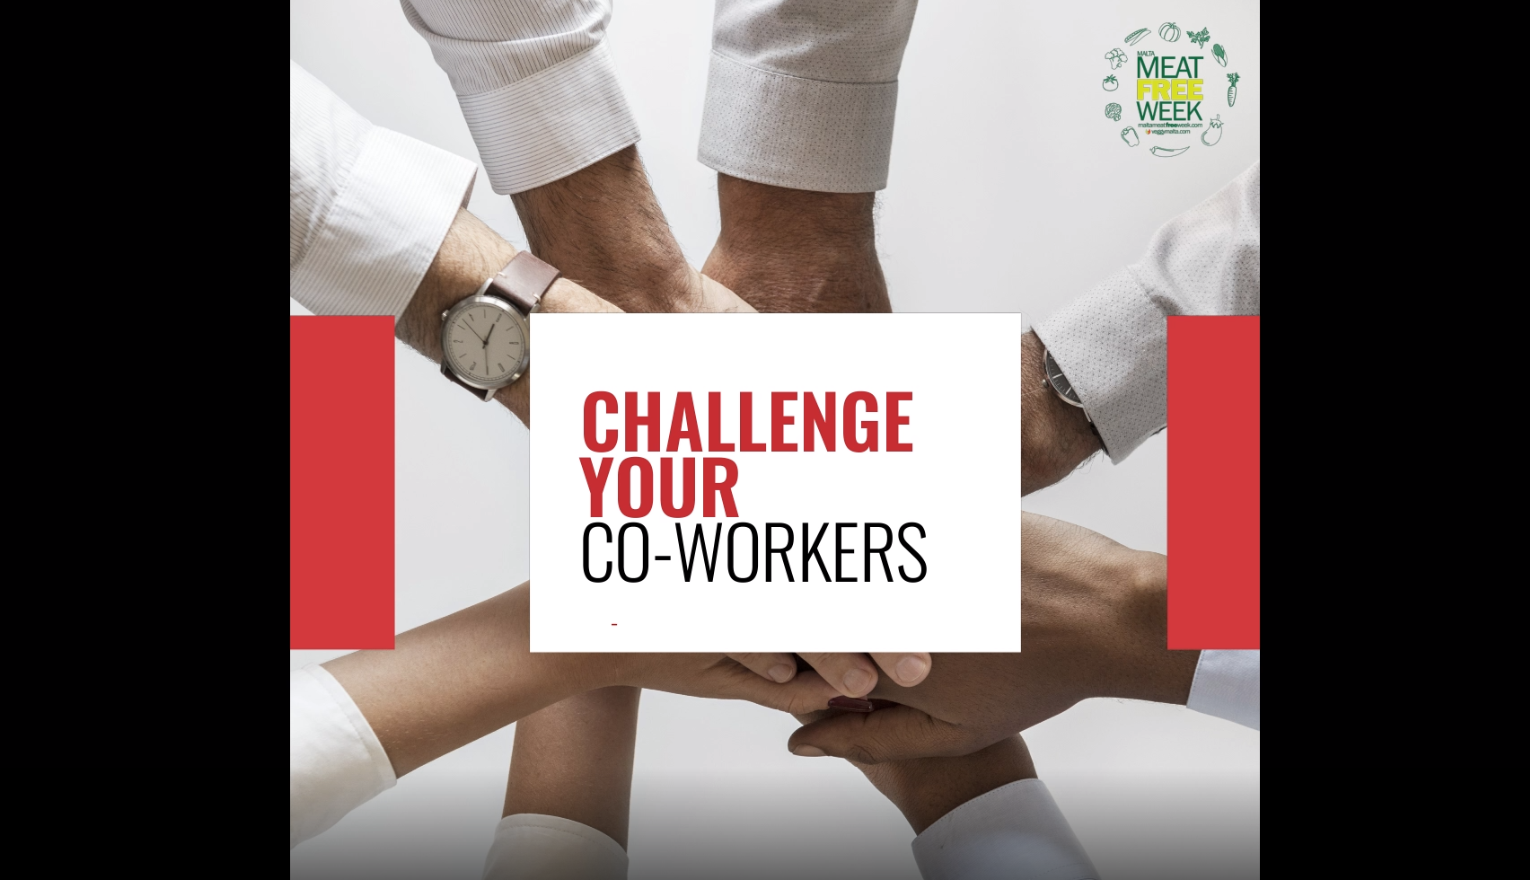 challenge your co workers malta meat free week